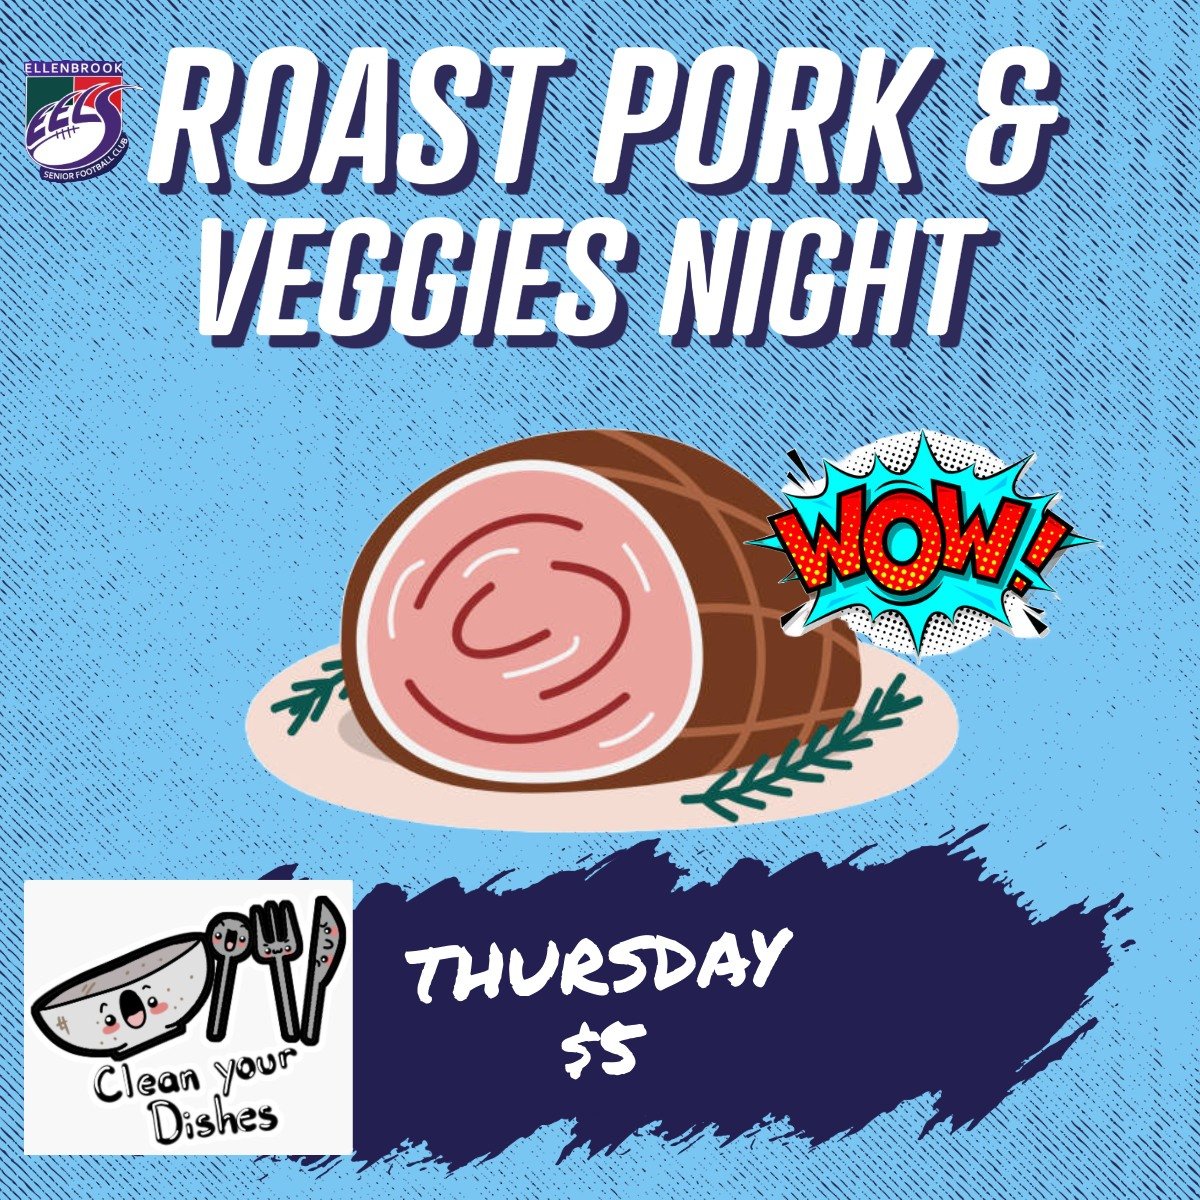 Thanks to our wonderful hardworking volunteers, we have $5 Roast Pork and Veggies for Dinner on Thursday night, during team selections. Don't forget to help out and clean your plates afterwards. 

The evening will include:

Team Selections
Old Bull Y